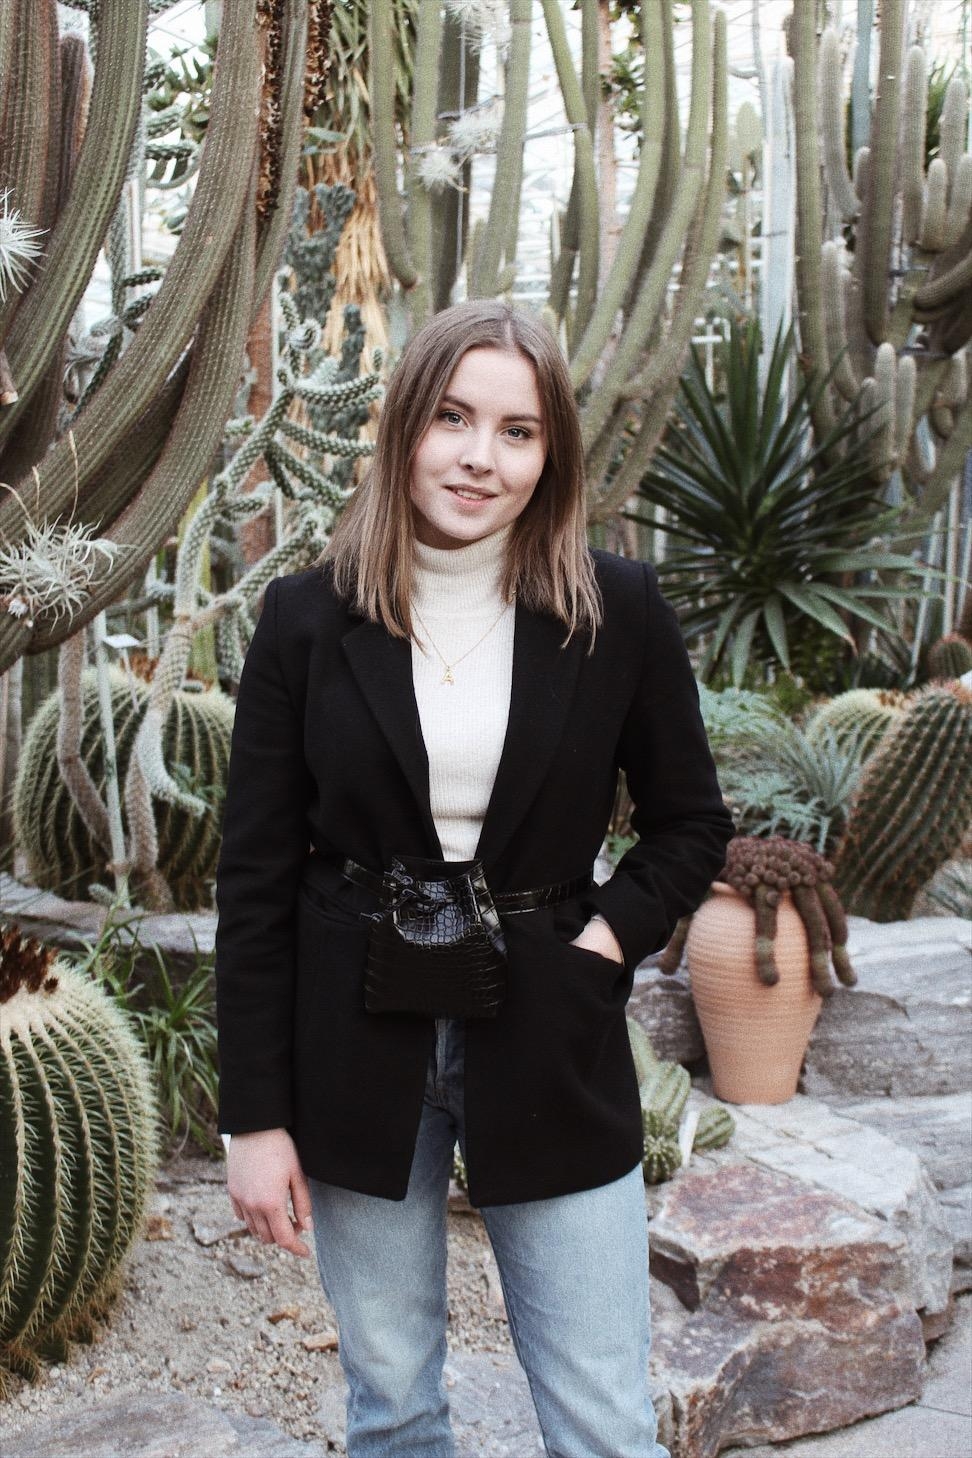 Welcome to the jungle 🌵
#ootd #outfit #fashion #blazer